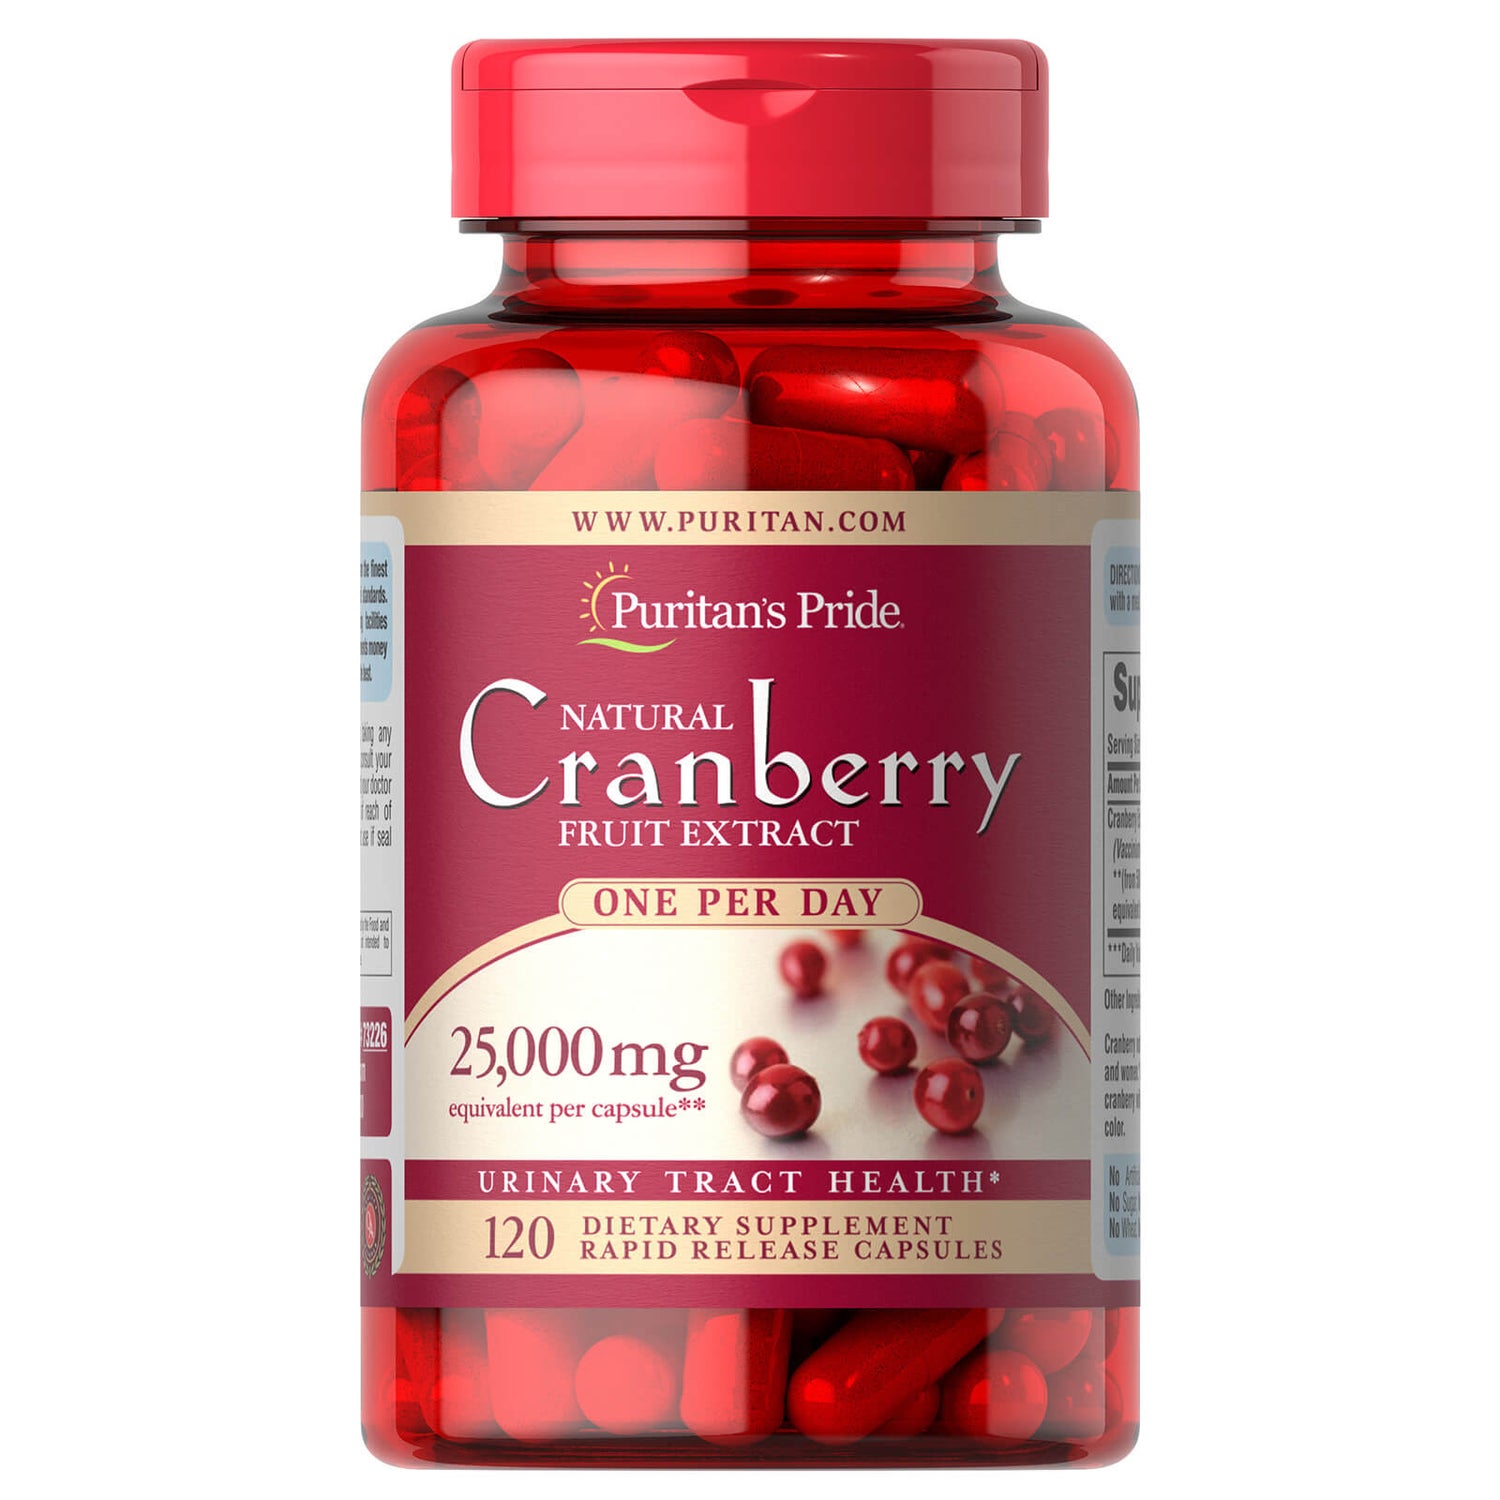 Puritan's Pride One A Day Cranberry 500mg - 120 Capsules